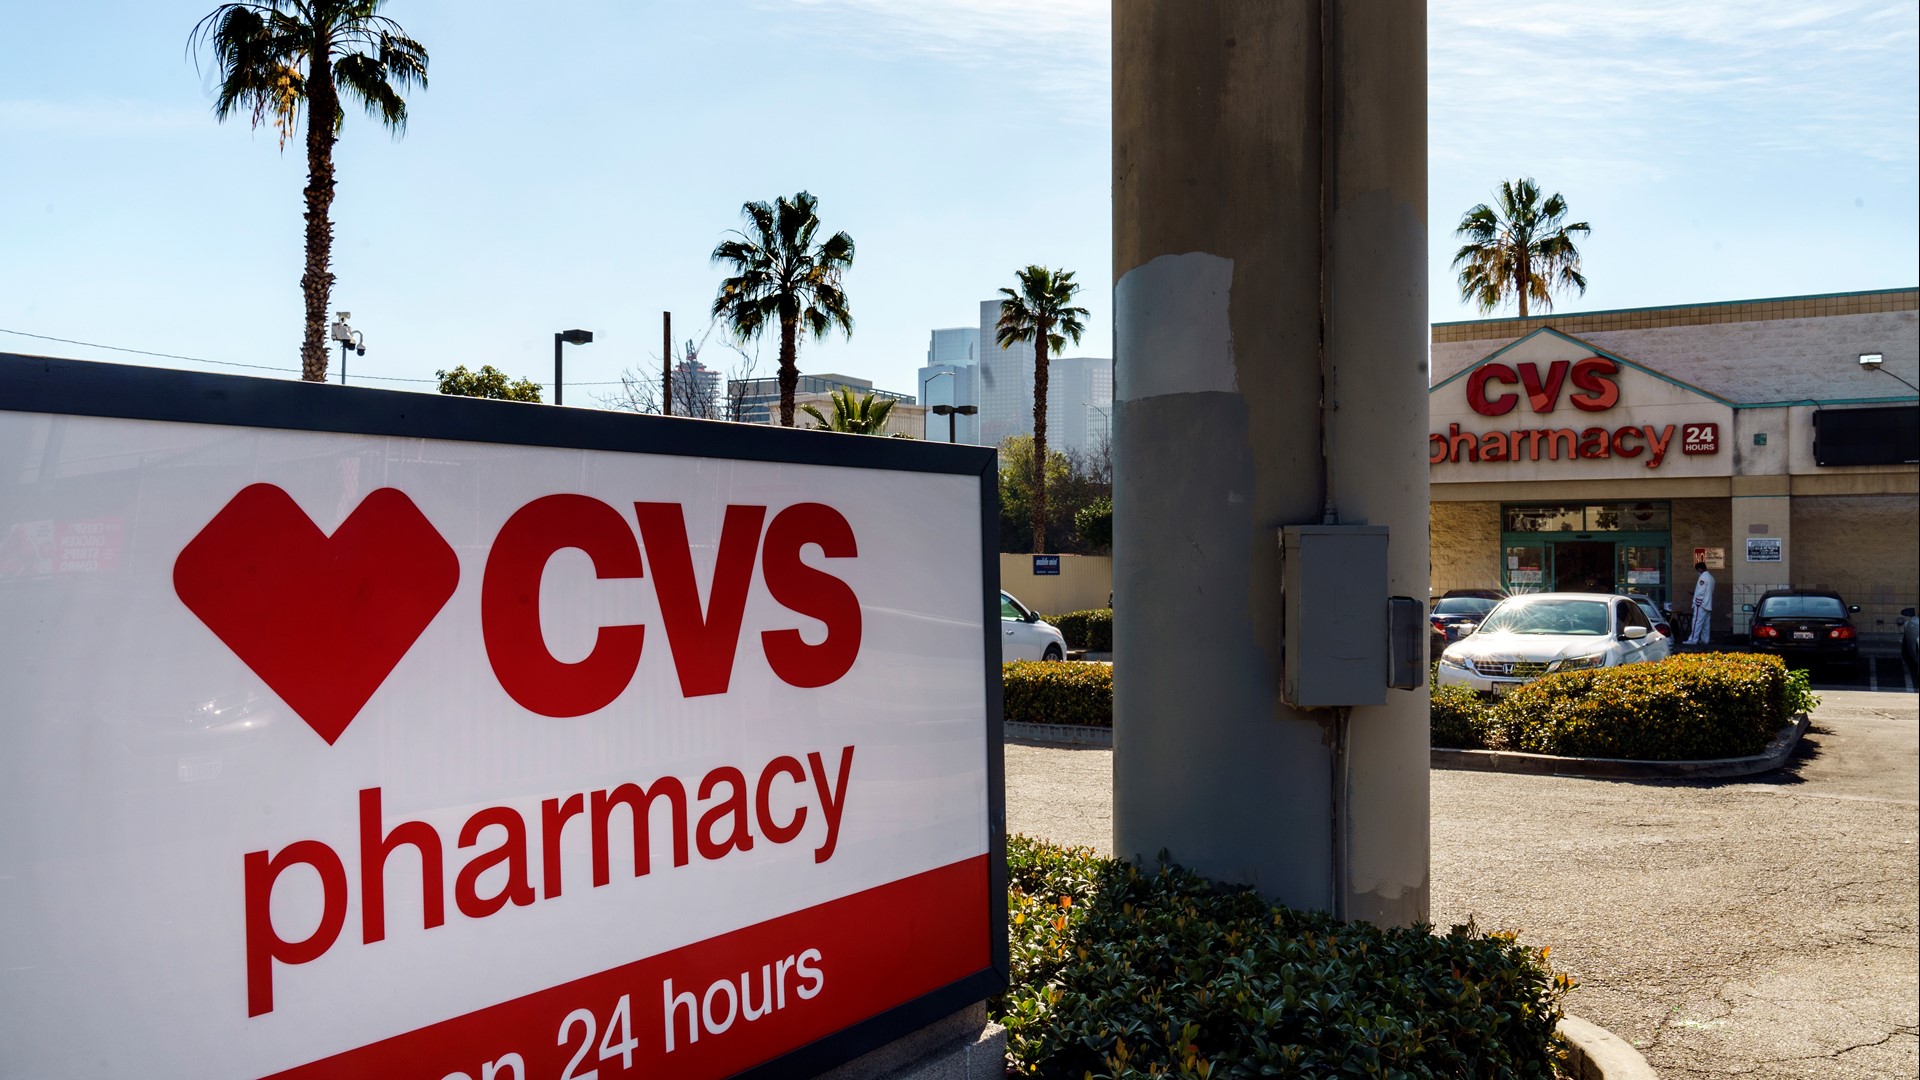 CVS pharmacies across California are receiving vaccine shipments to vaccinate those ages 65 and up. Appointments can be made on the CVS website.